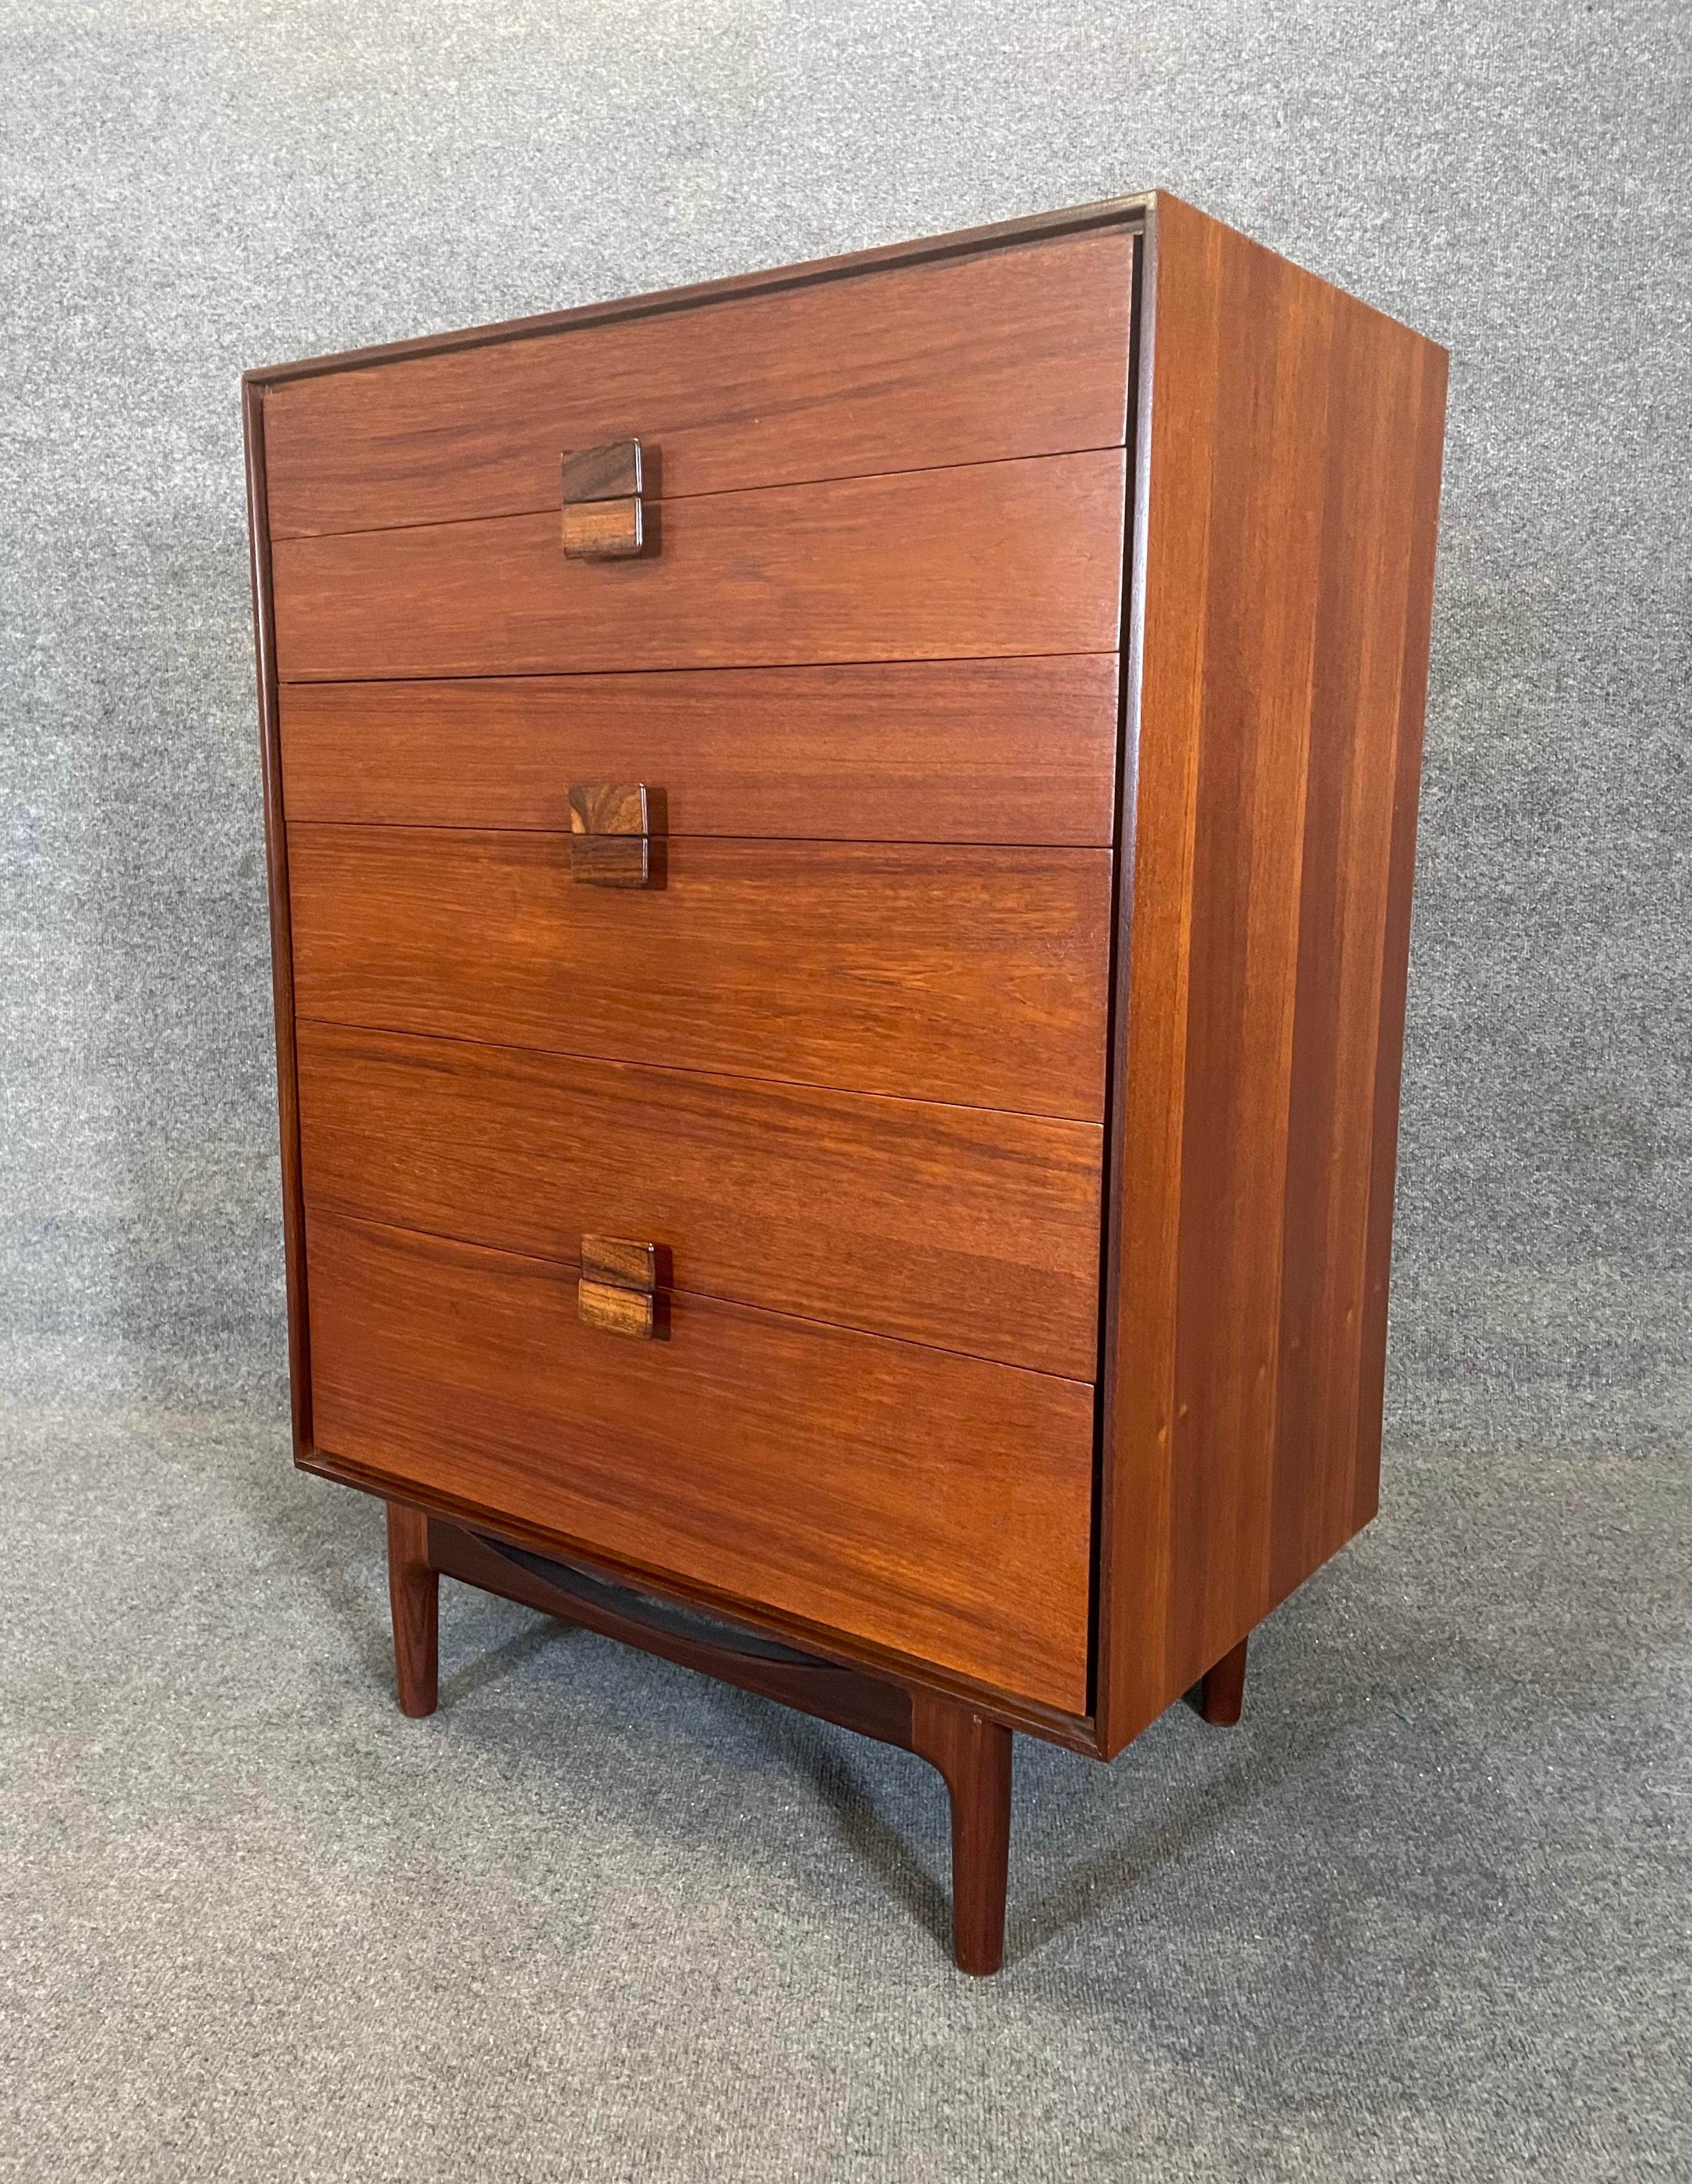 Here is a beautiful British mid century modern teak dresser designed by Ib Kofod Larsen and manufactured by G Plan in England in the 1960's.
This exquisite case piece, recently imported from Europe to California before its refinishing, features a